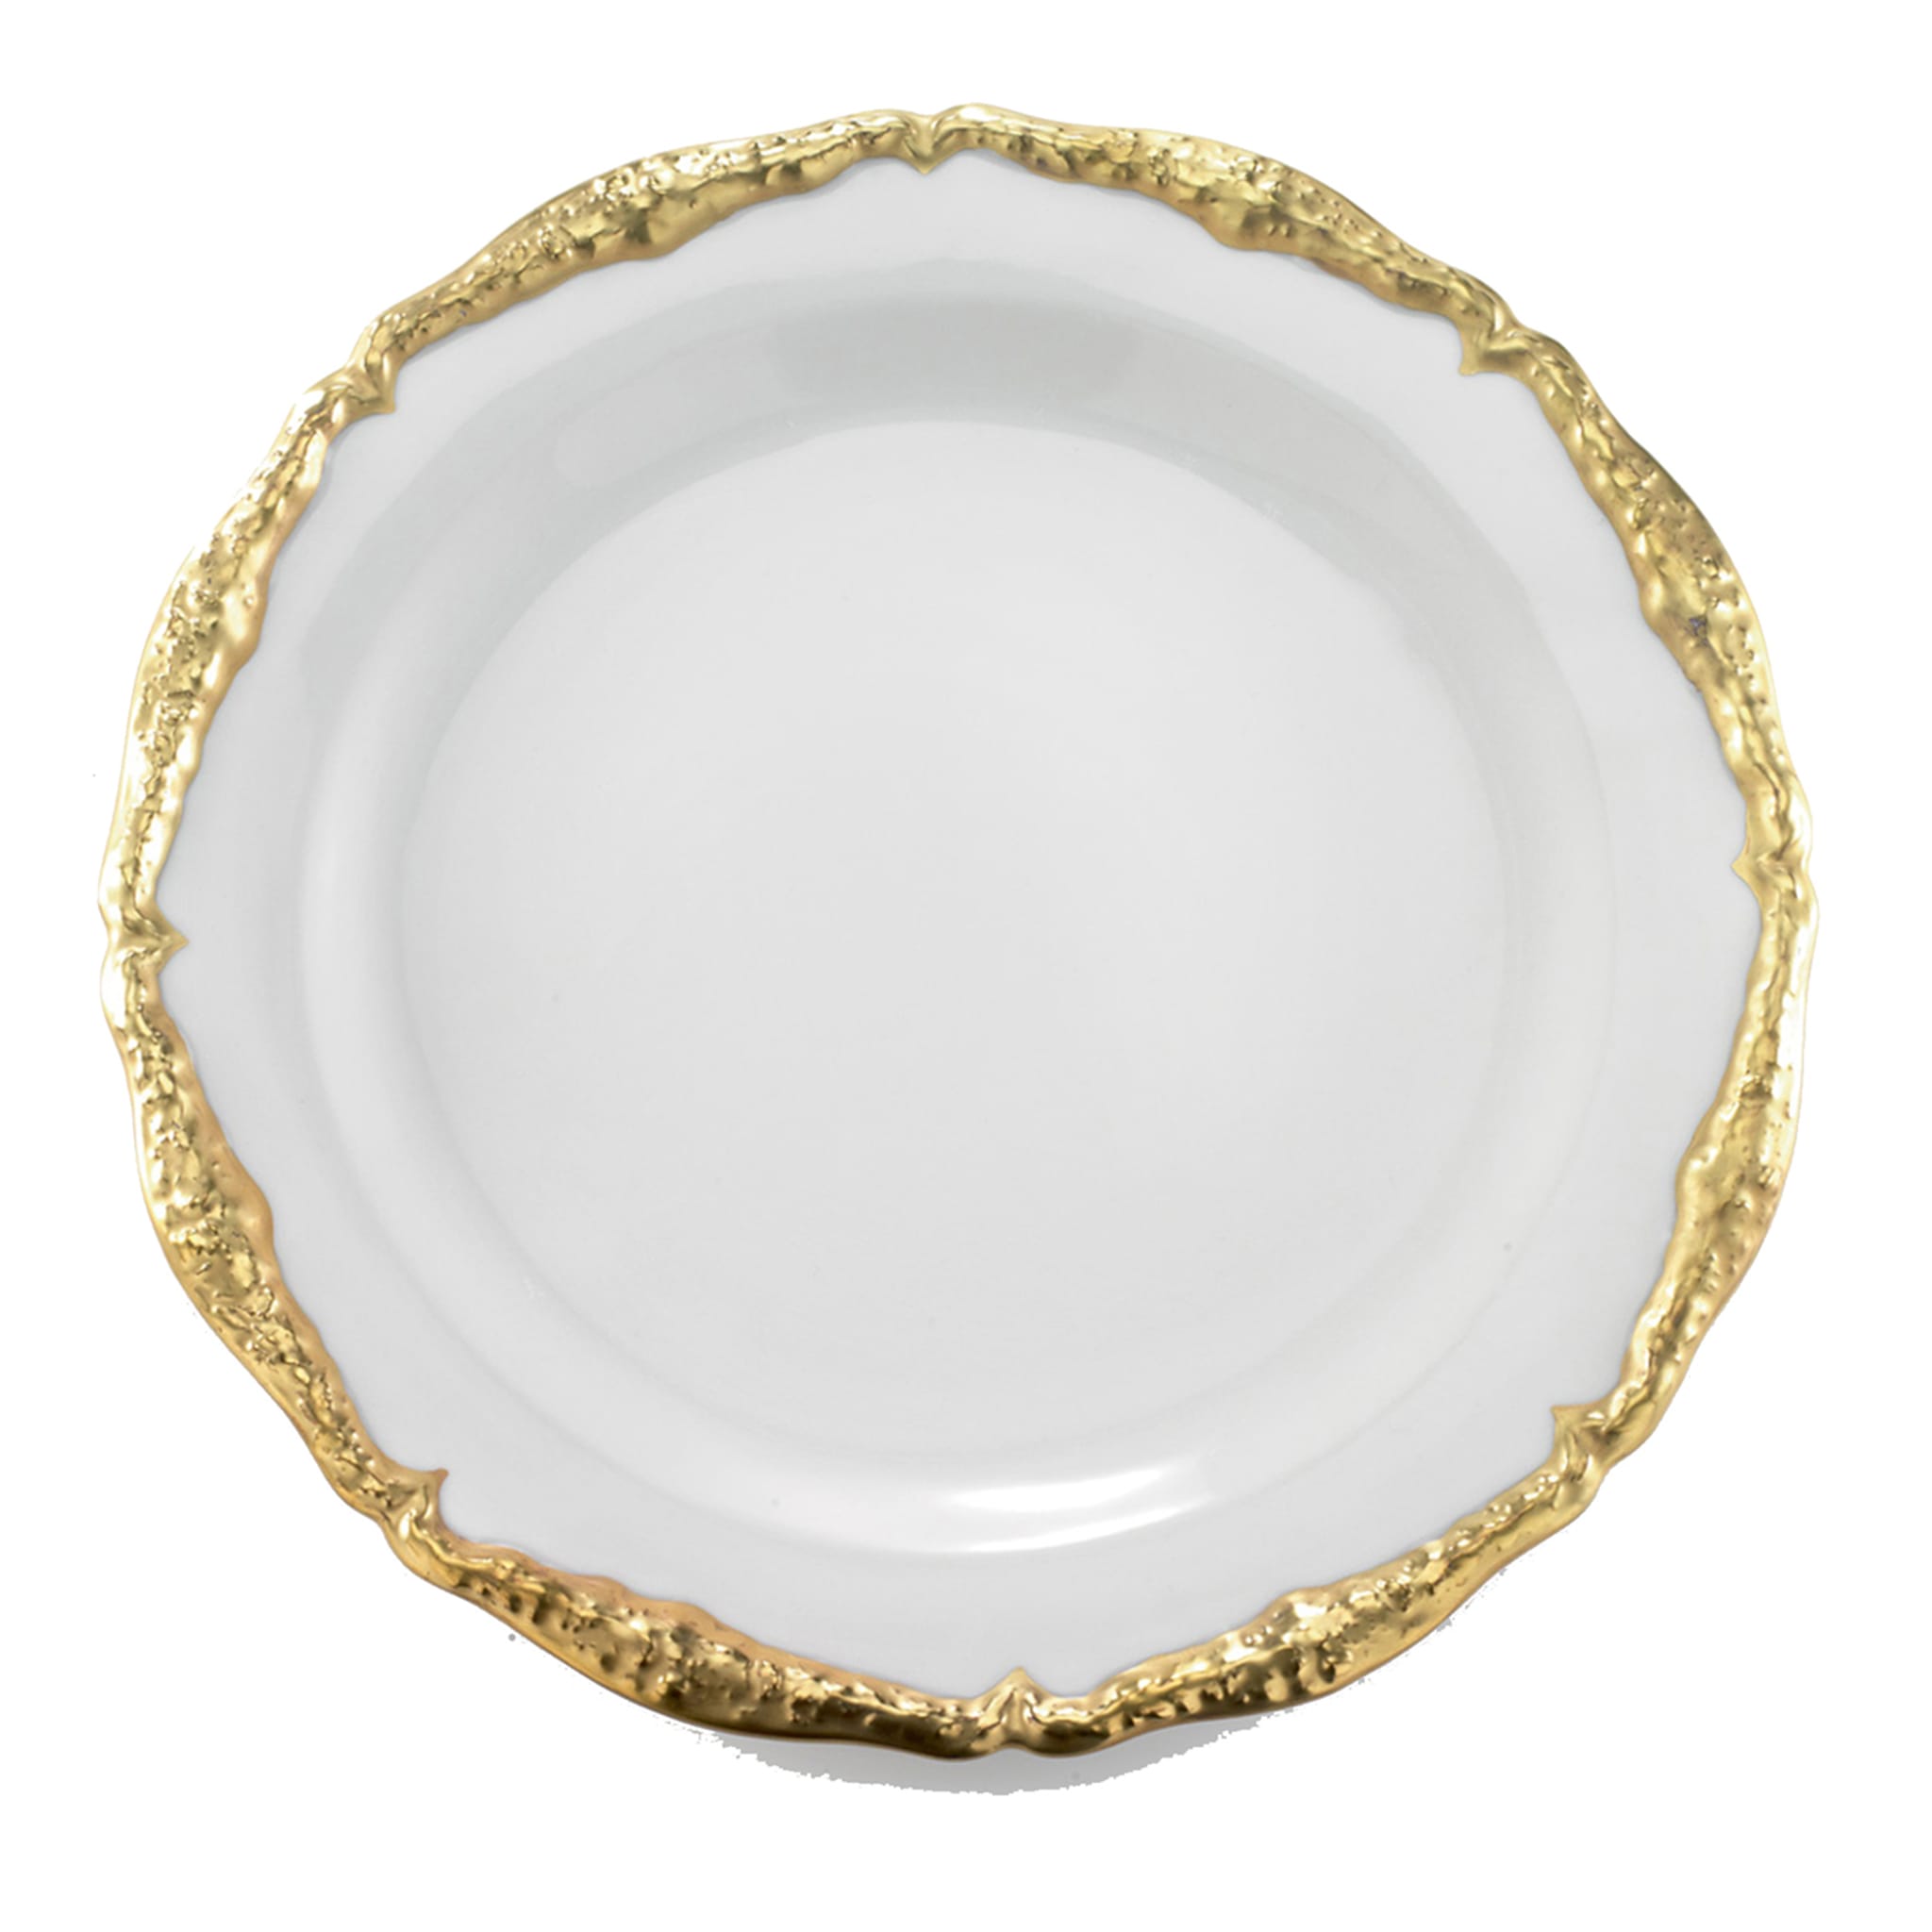 EMPIRE DINNER PLATE - Main view